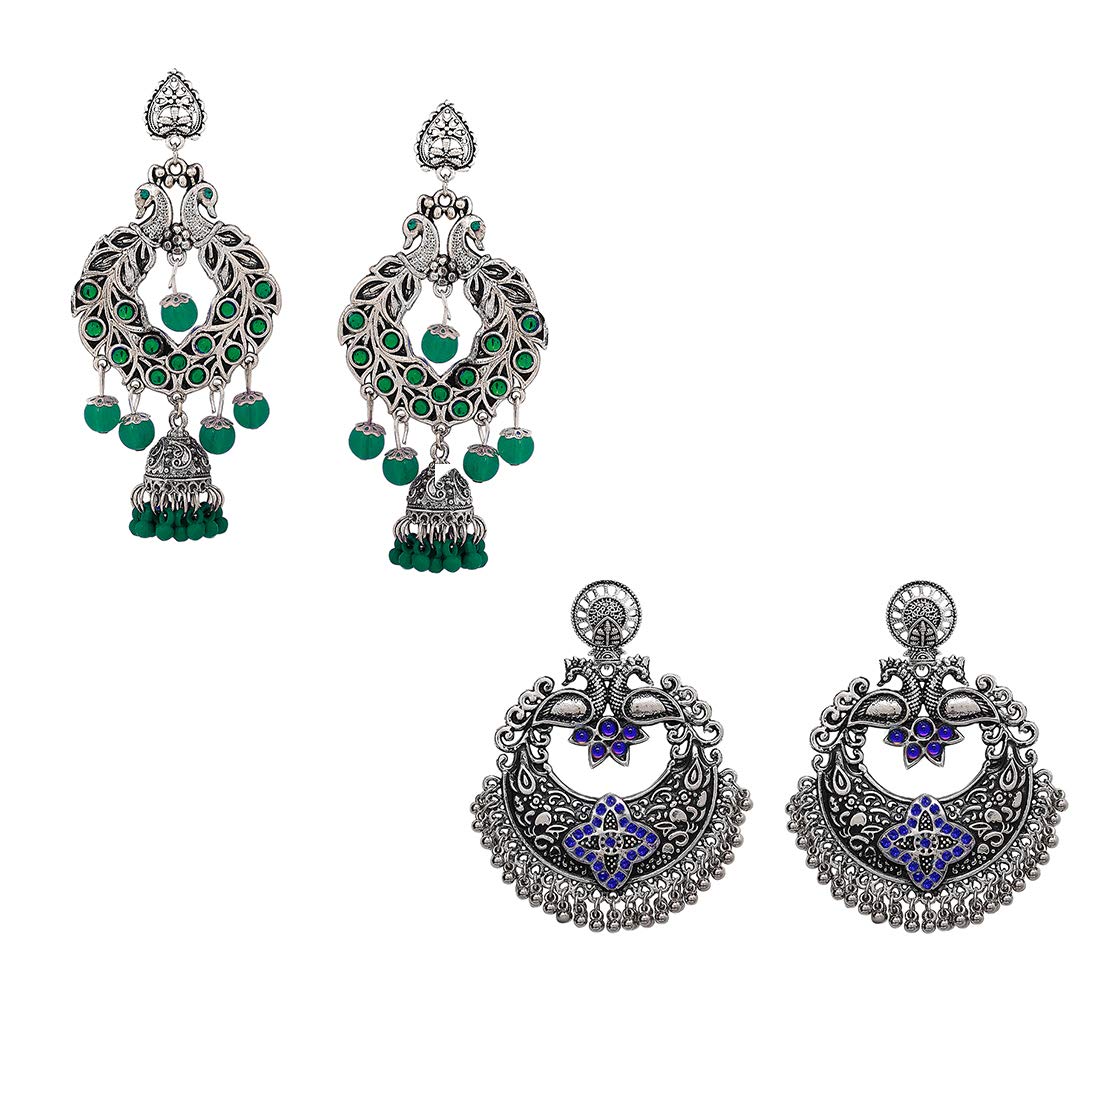 Yellow Chimes Combo of 2 Pairs Ethnic Silver Oxidised Floral Design Beads Studded Stones Chandbali Jhumka Earrings for Women and Girls, medium (YCTJER-CHNDNGLR-C-GRBL), green, blue